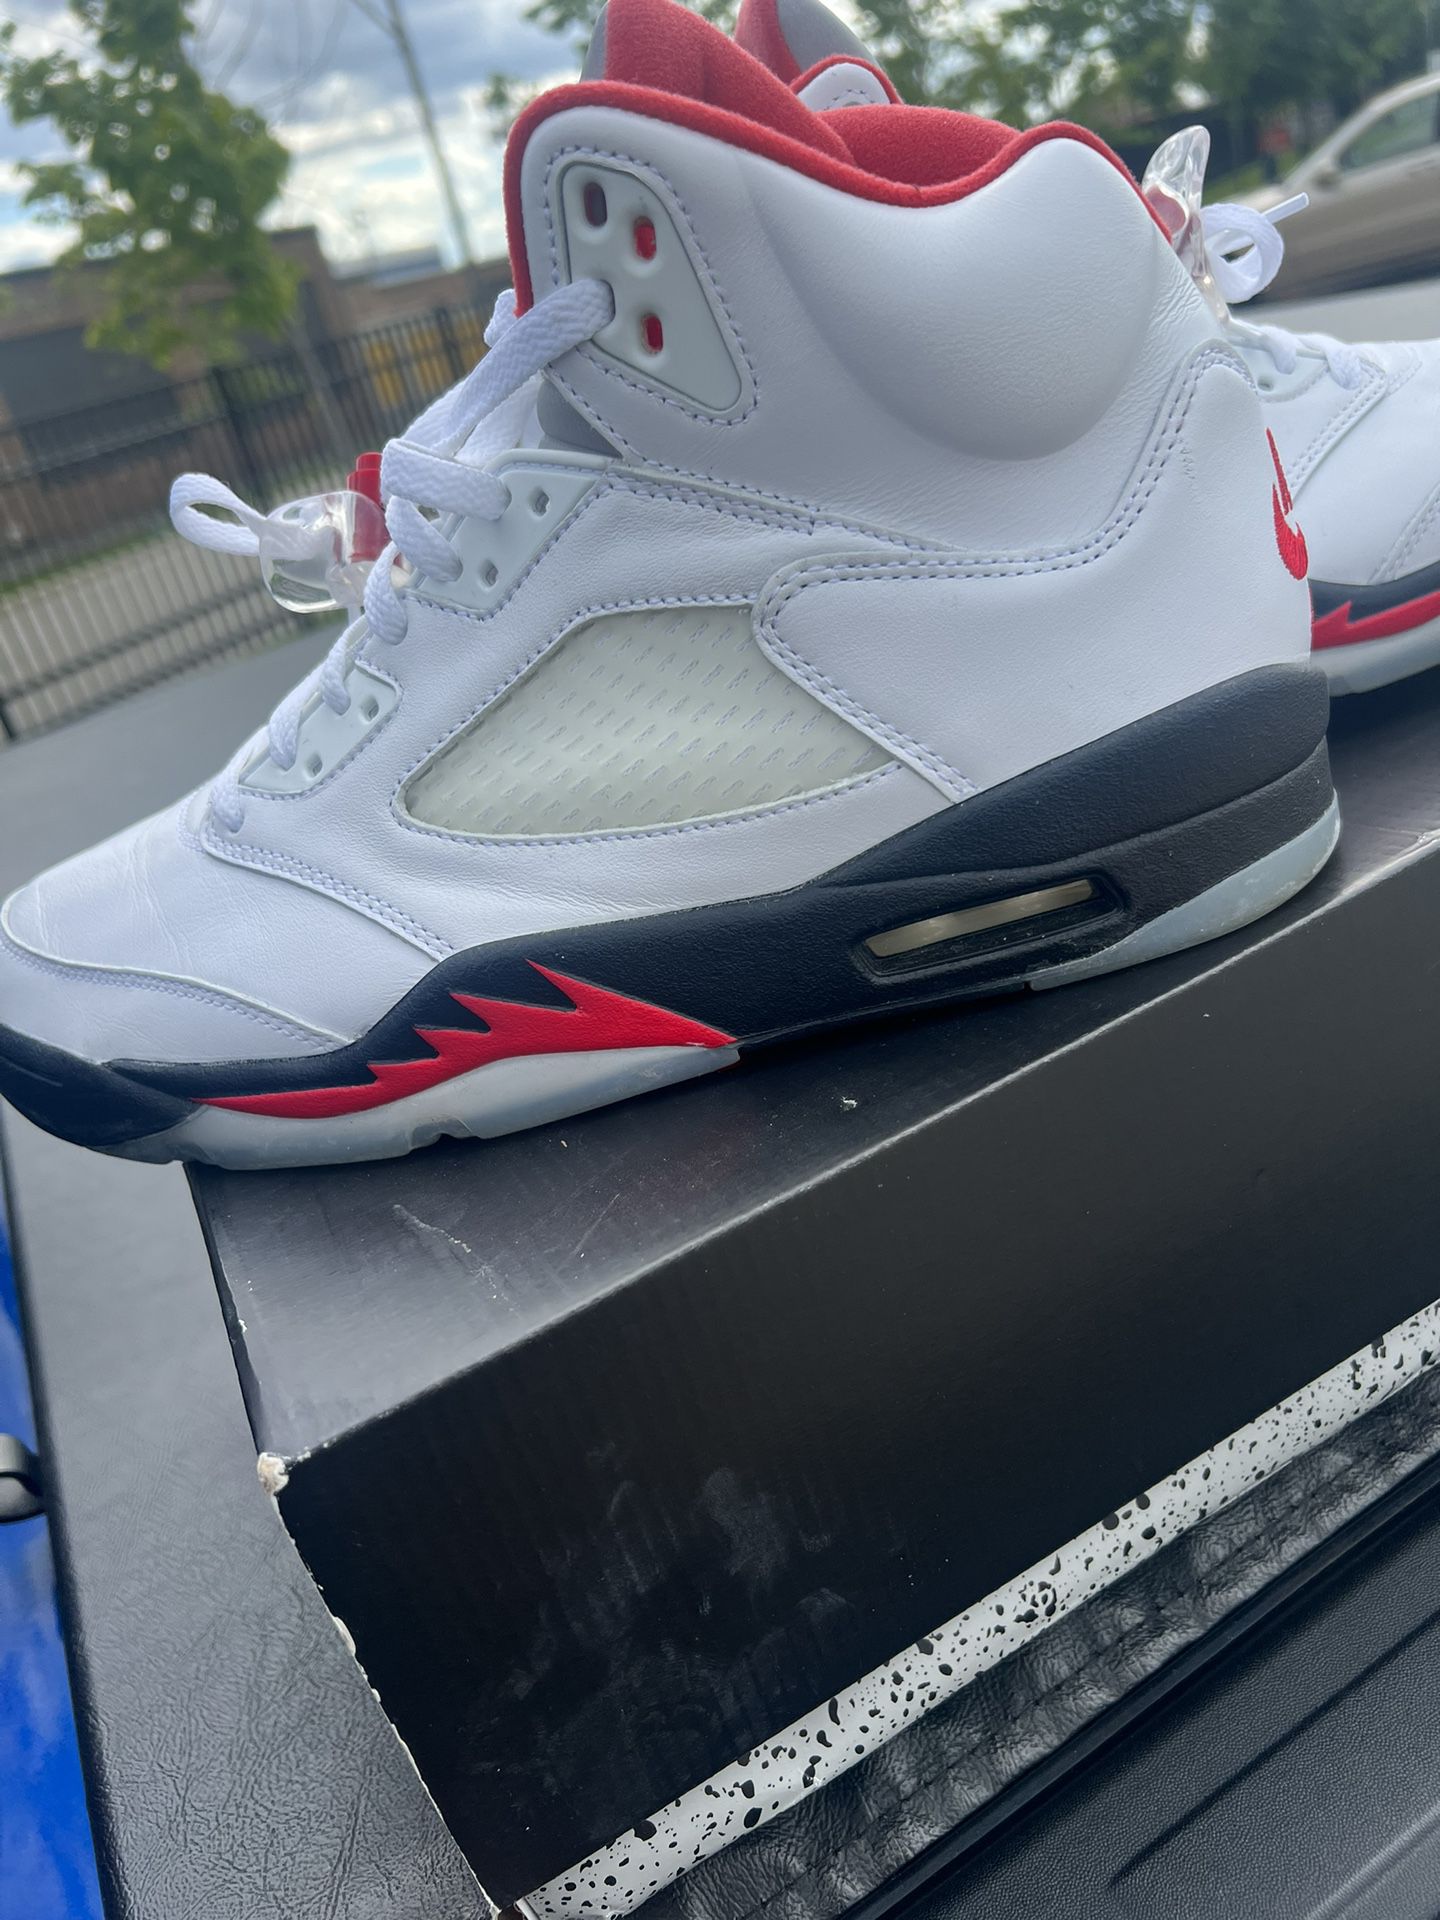 Retro 5 OF FIRE RED 2020